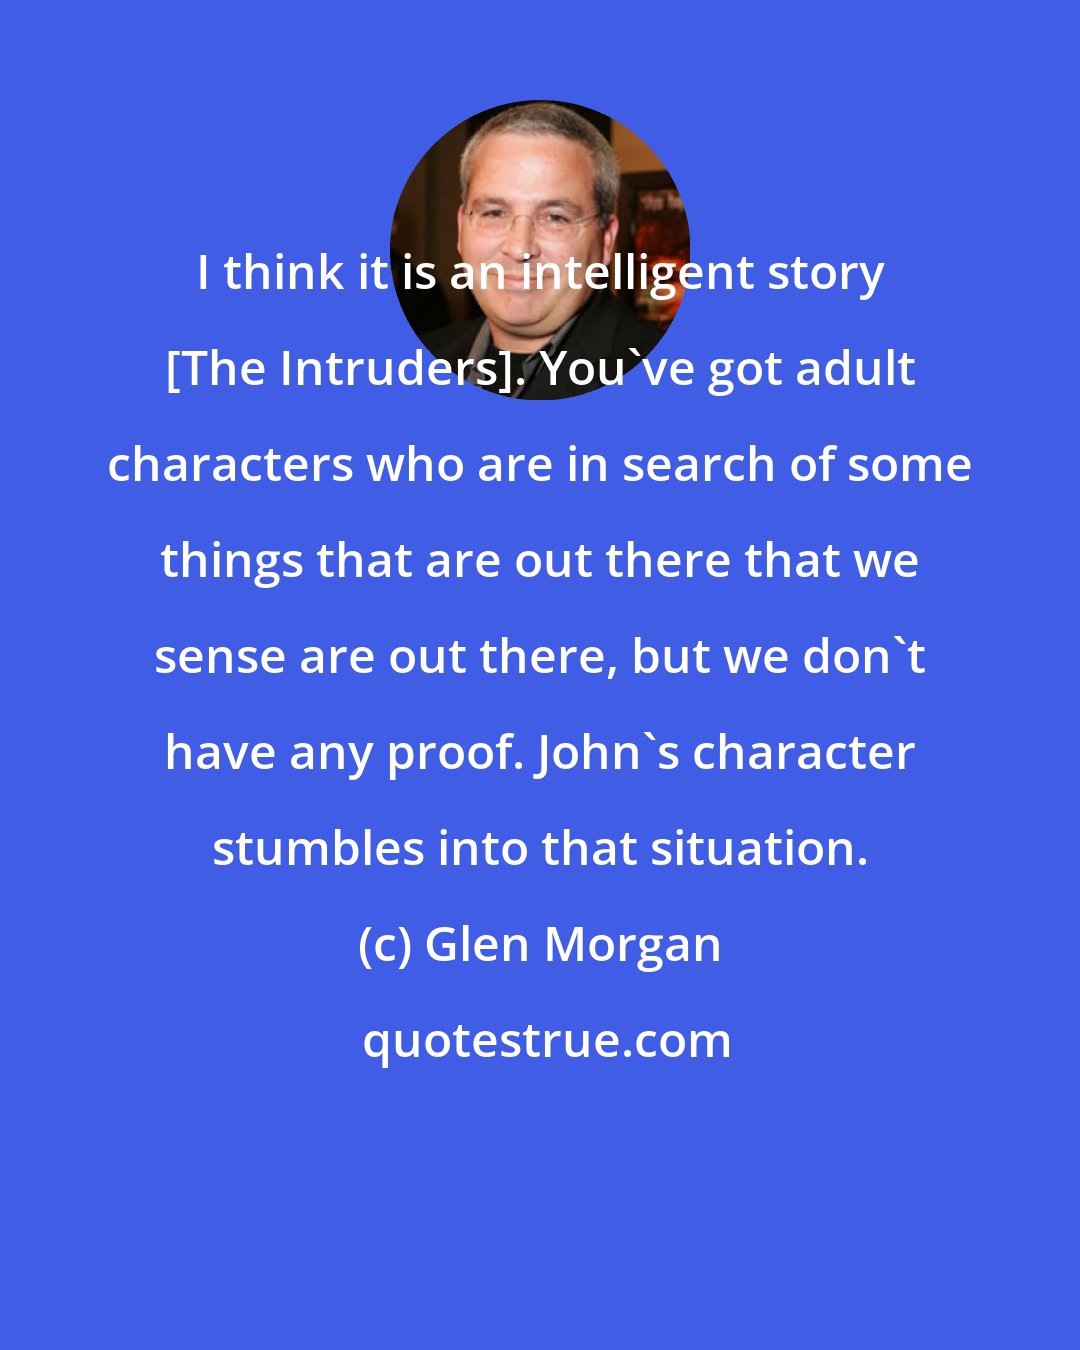 Glen Morgan: I think it is an intelligent story [The Intruders]. You've got adult characters who are in search of some things that are out there that we sense are out there, but we don't have any proof. John's character stumbles into that situation.